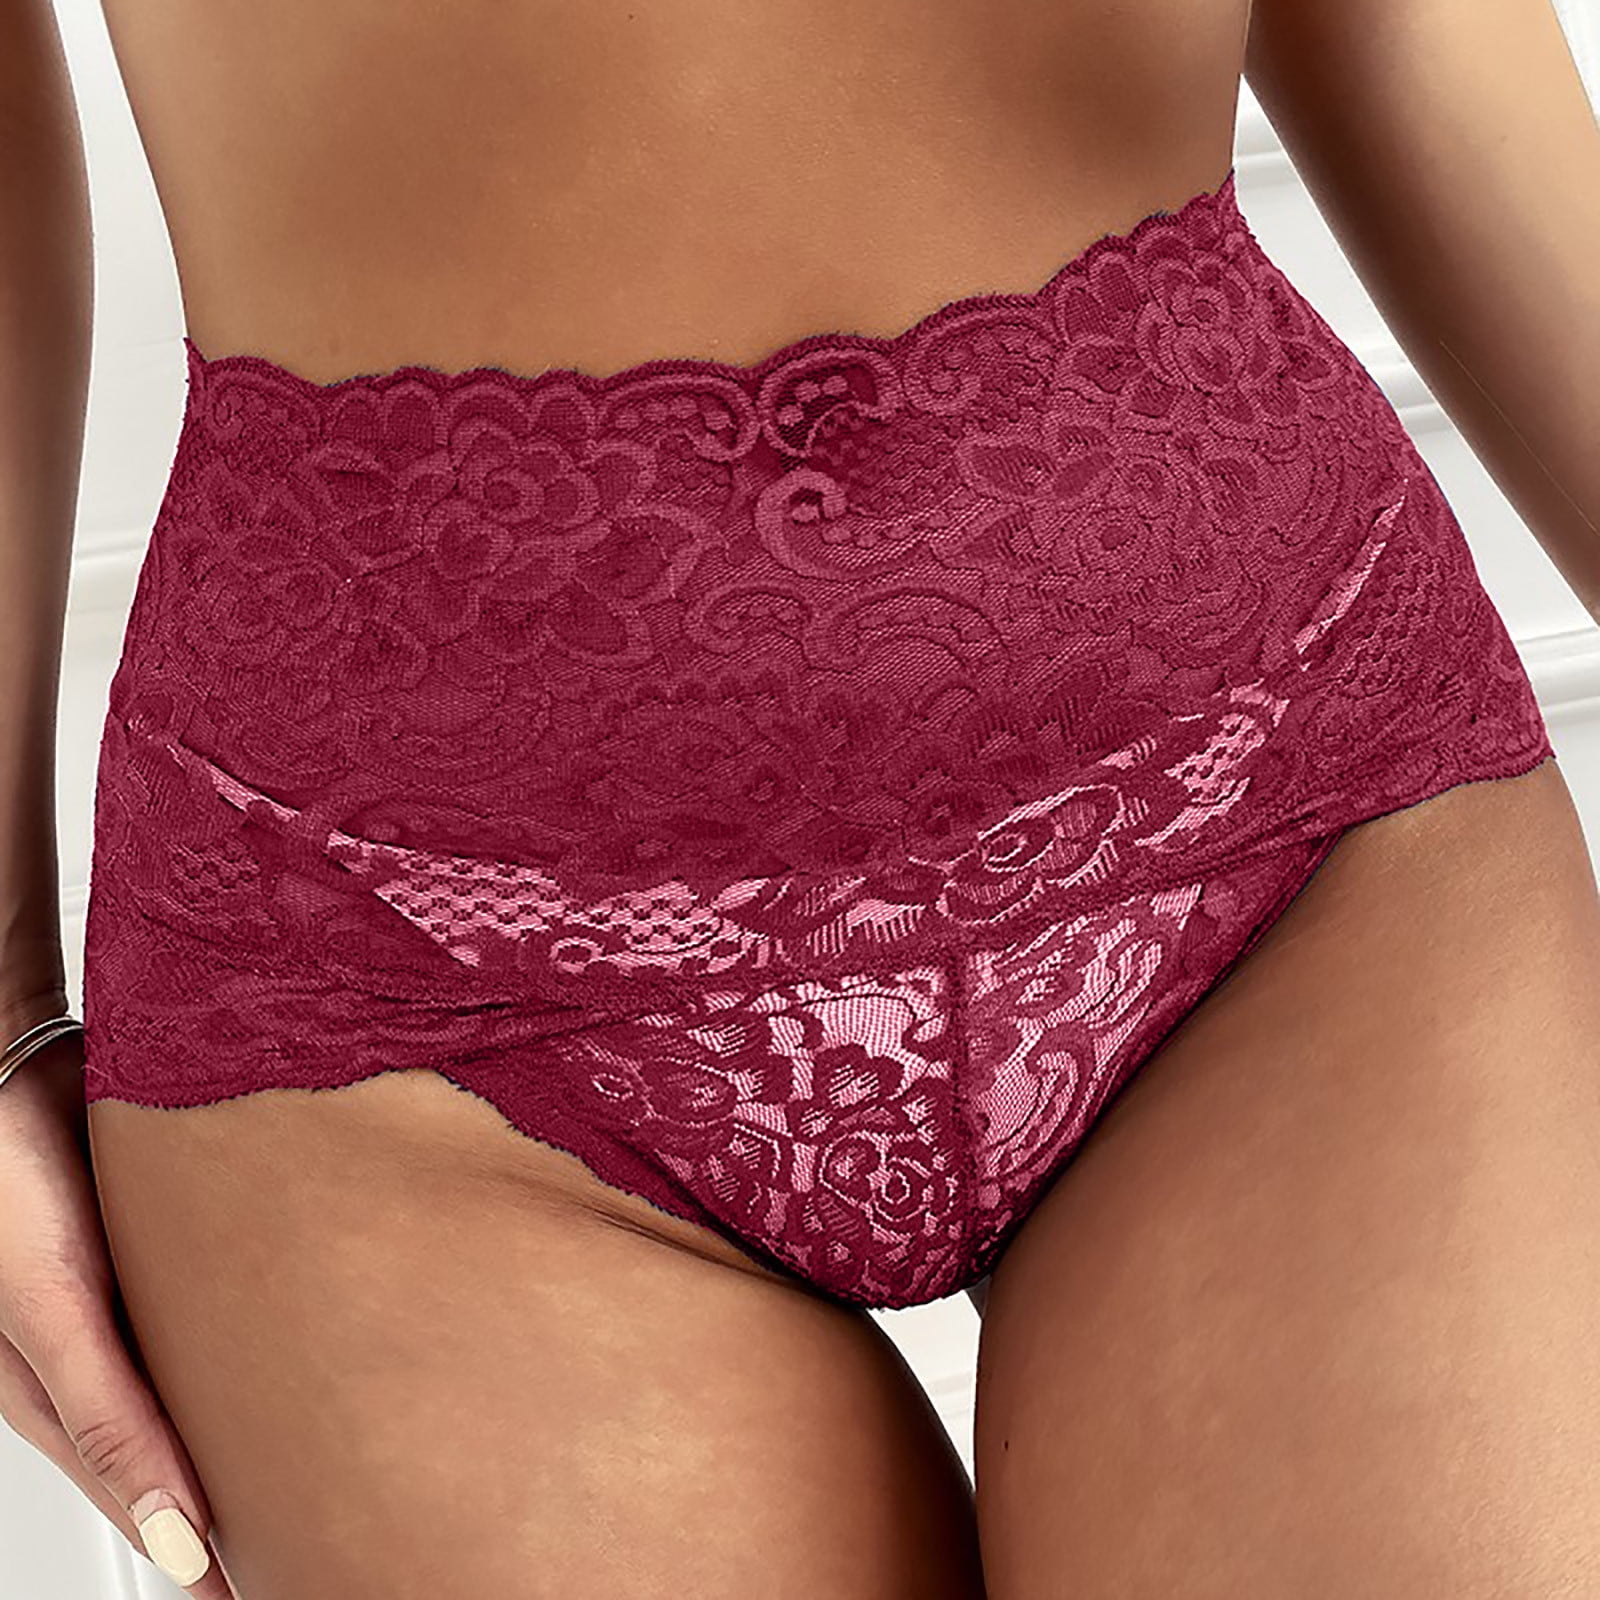 Lopecy-Sta Ladies Sexy Temptation Underwear High Waist Lace Hips Breathable Sexy  Panties Discount Clearance Underwear Women Mother's Day Gifts Wine 